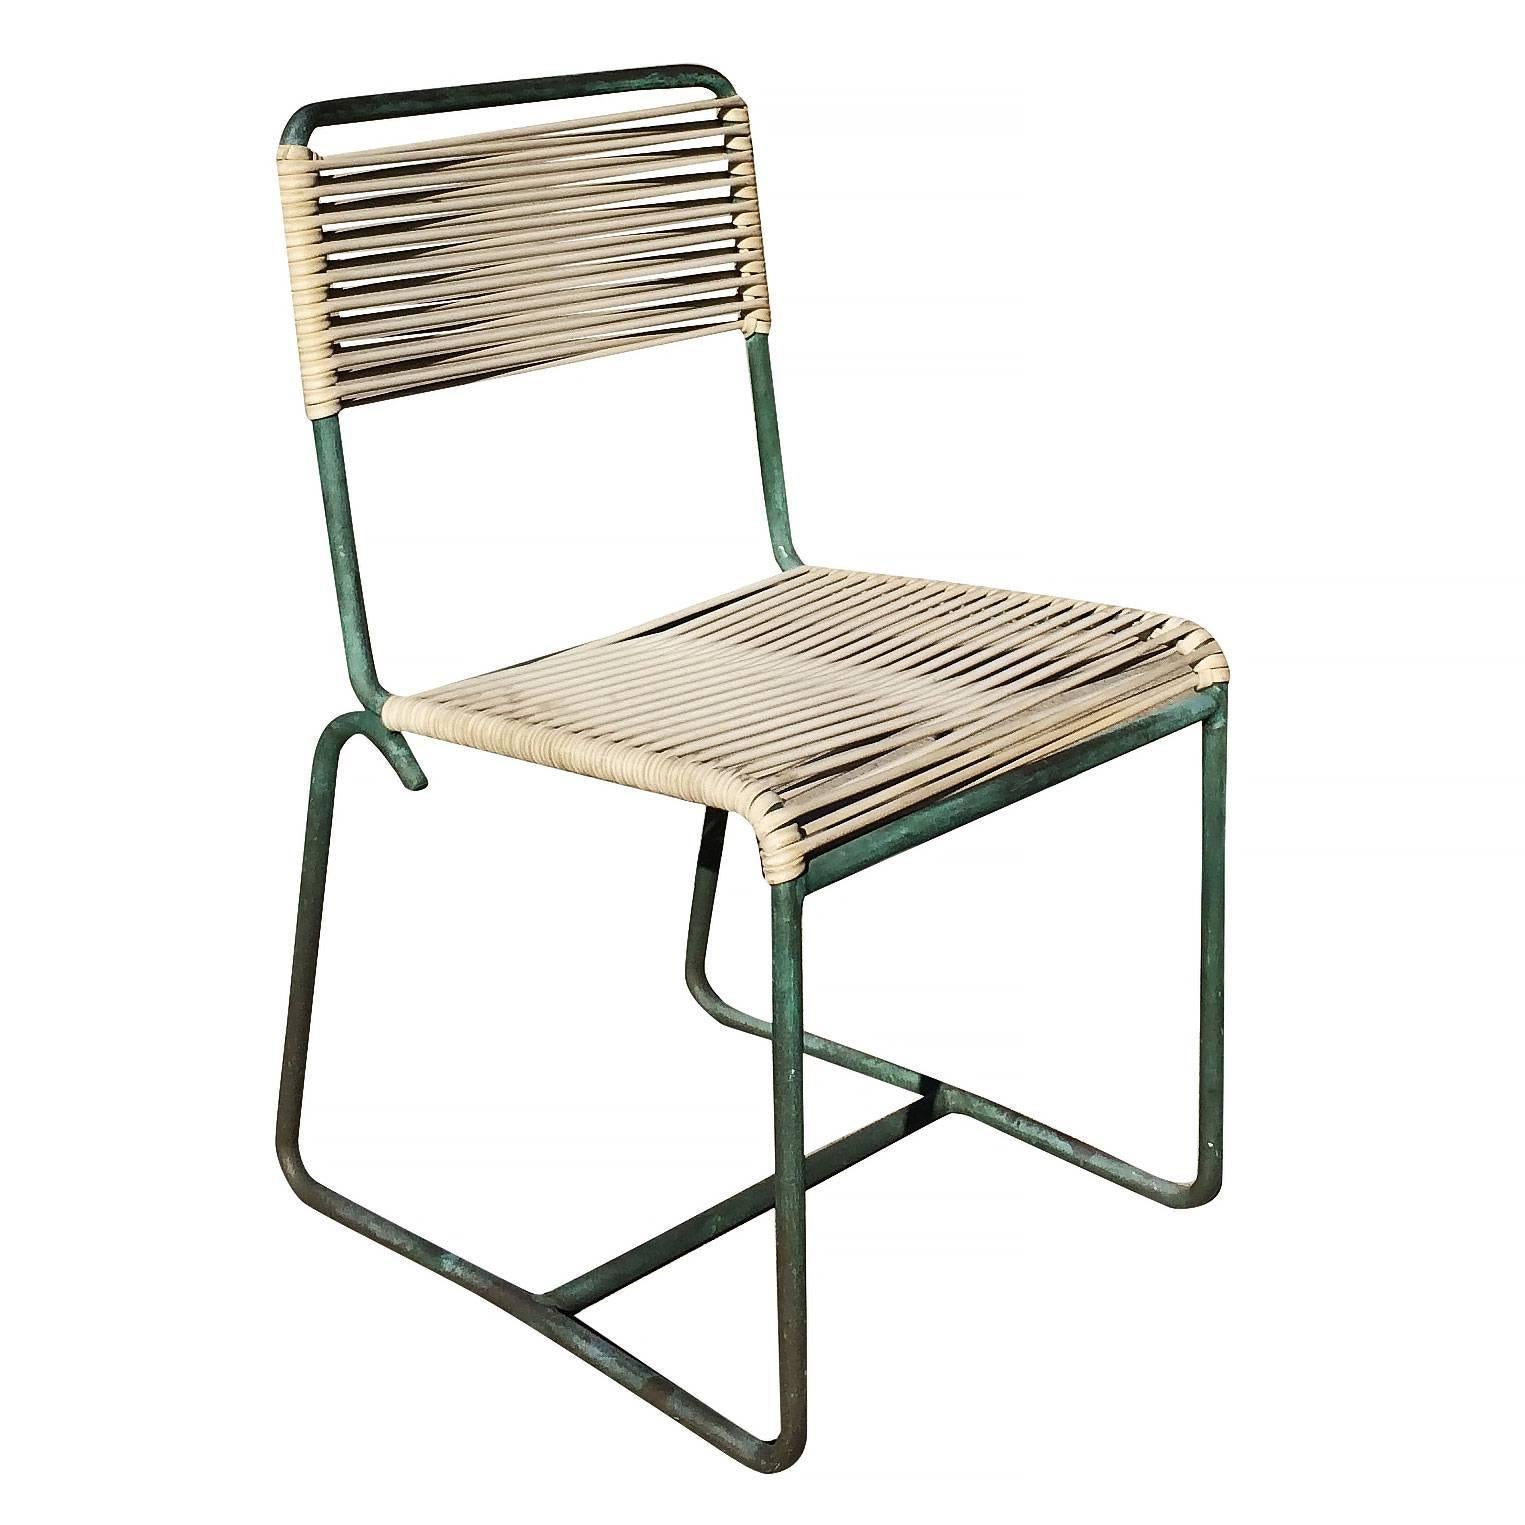 Set of four outdoor/patio tubular bronze frame chairs with cloth cording seat and back with a verdigris bronze finish.

This set includes 3 side chairs and armchair.

Designed by Walter Lamb and manufactured by Brown Jordan.